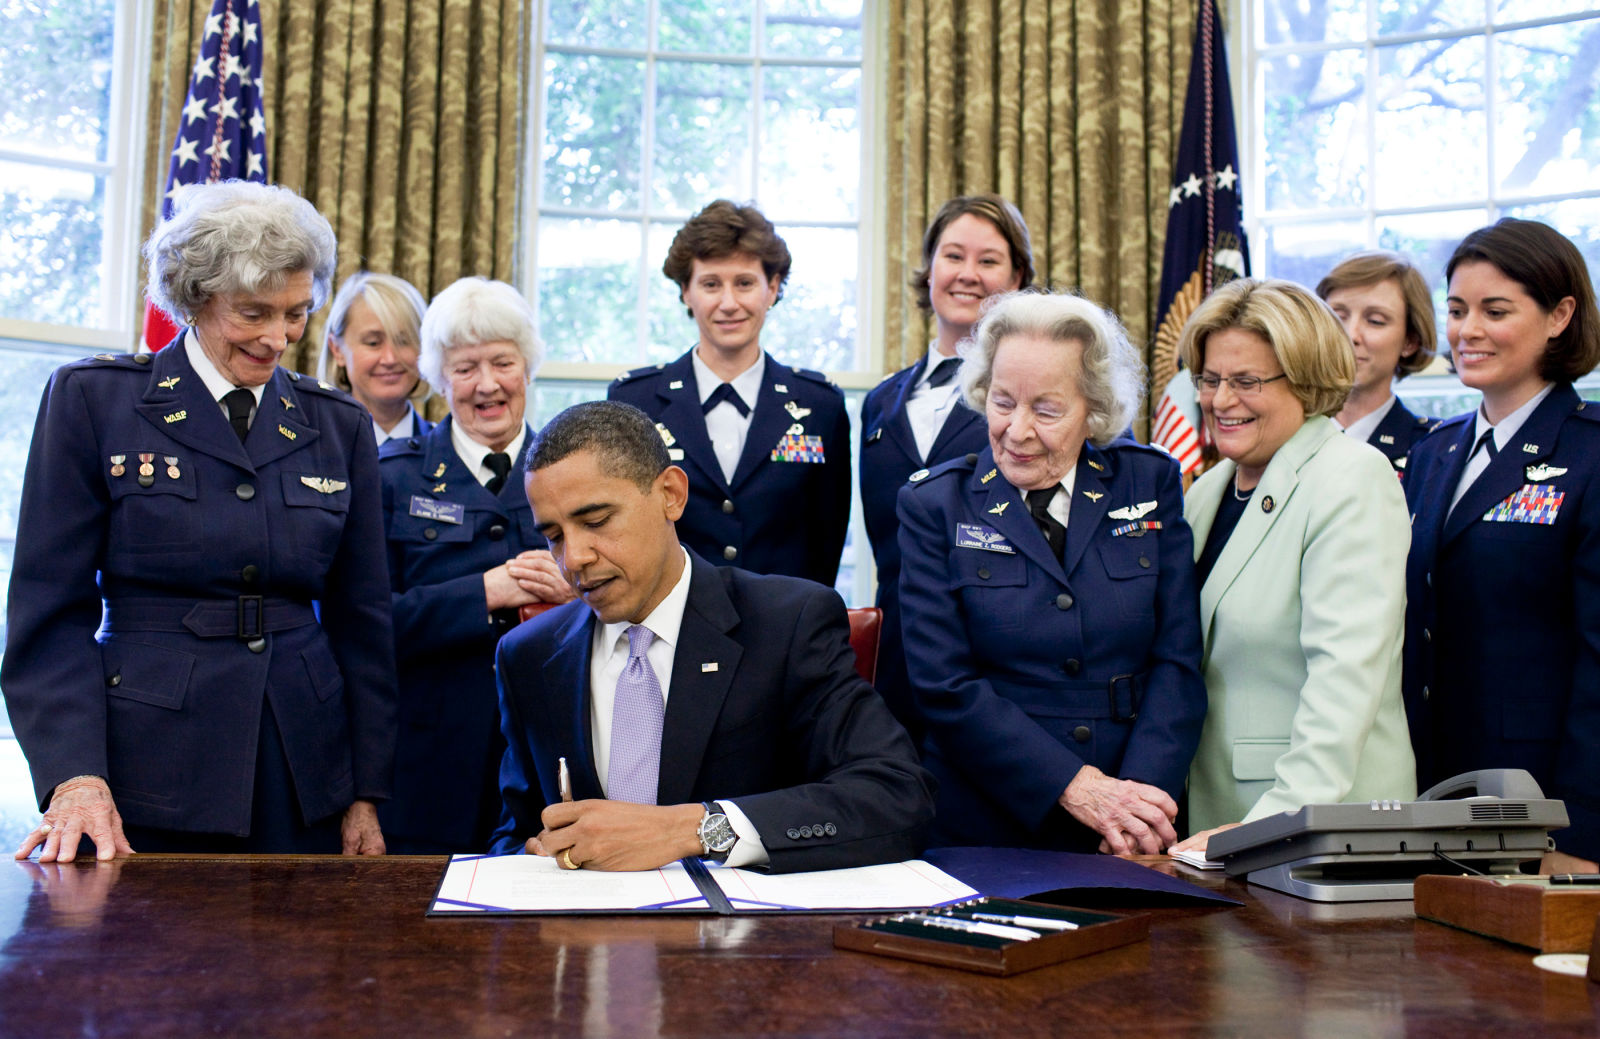 Surrounded by former WASP pilots and current and retired USAF pilots, President Barack Obama signs S.614 in the Oval Office July 1, 2009 at the White House. The bill awards the Congressional Gold Medal to Women Airforce Service Pilots.